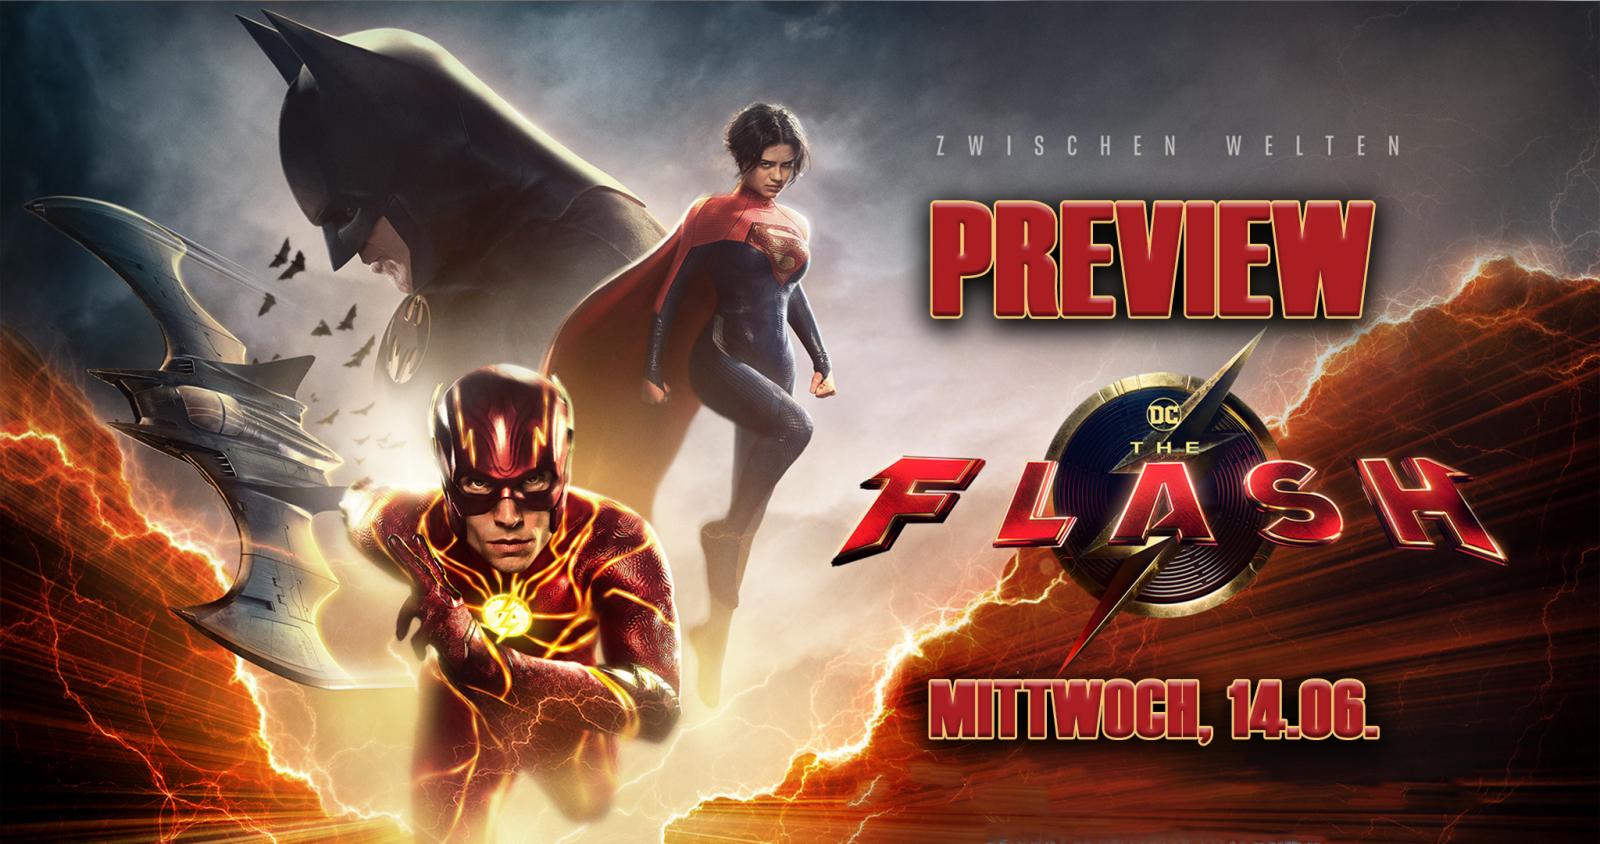 Preview: The Flash